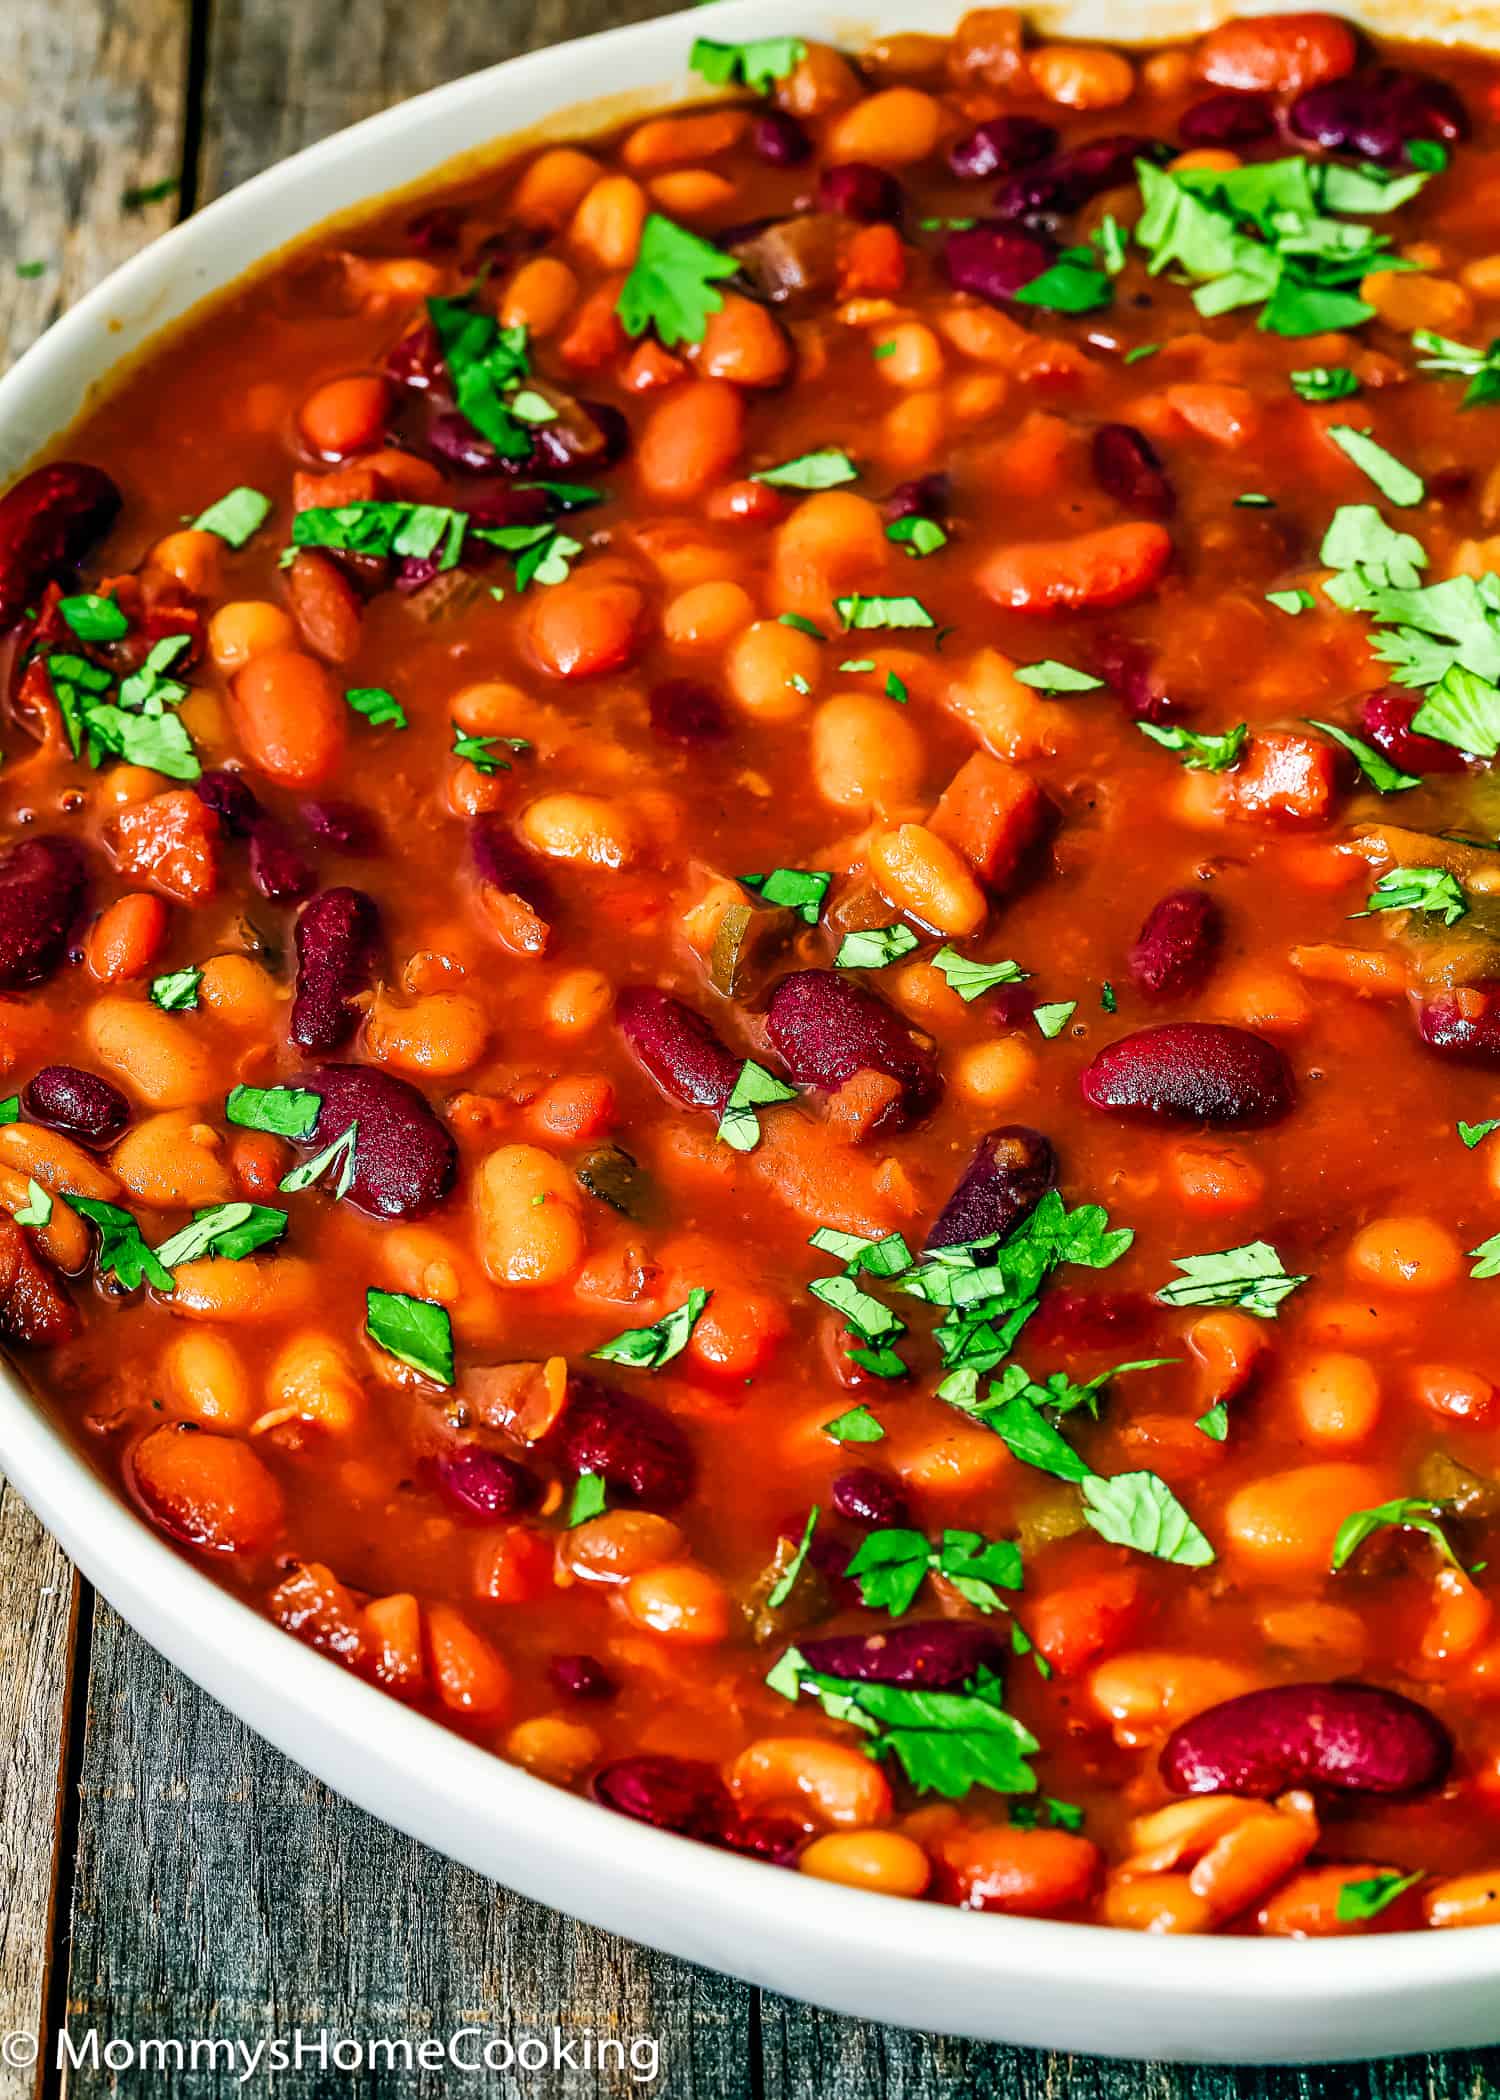 baked beans made with canned beans in a bowl.